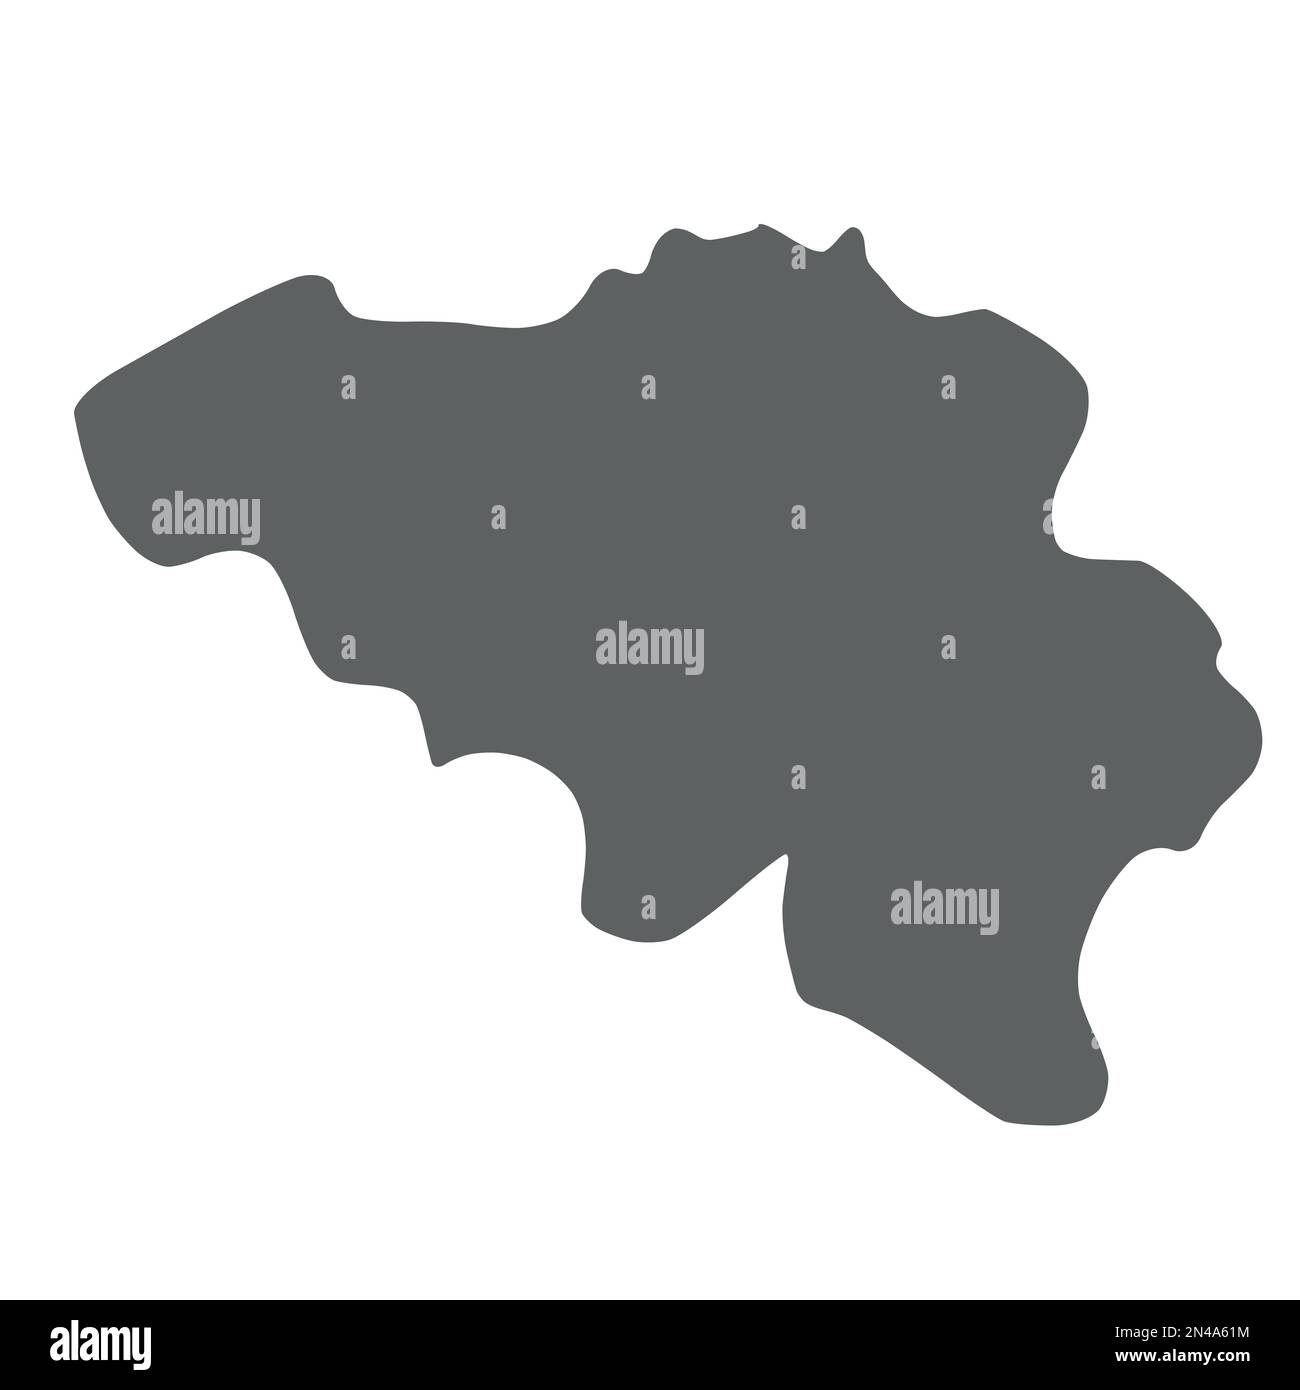 Belgium - smooth grey silhouette map of country area. Simple flat ...